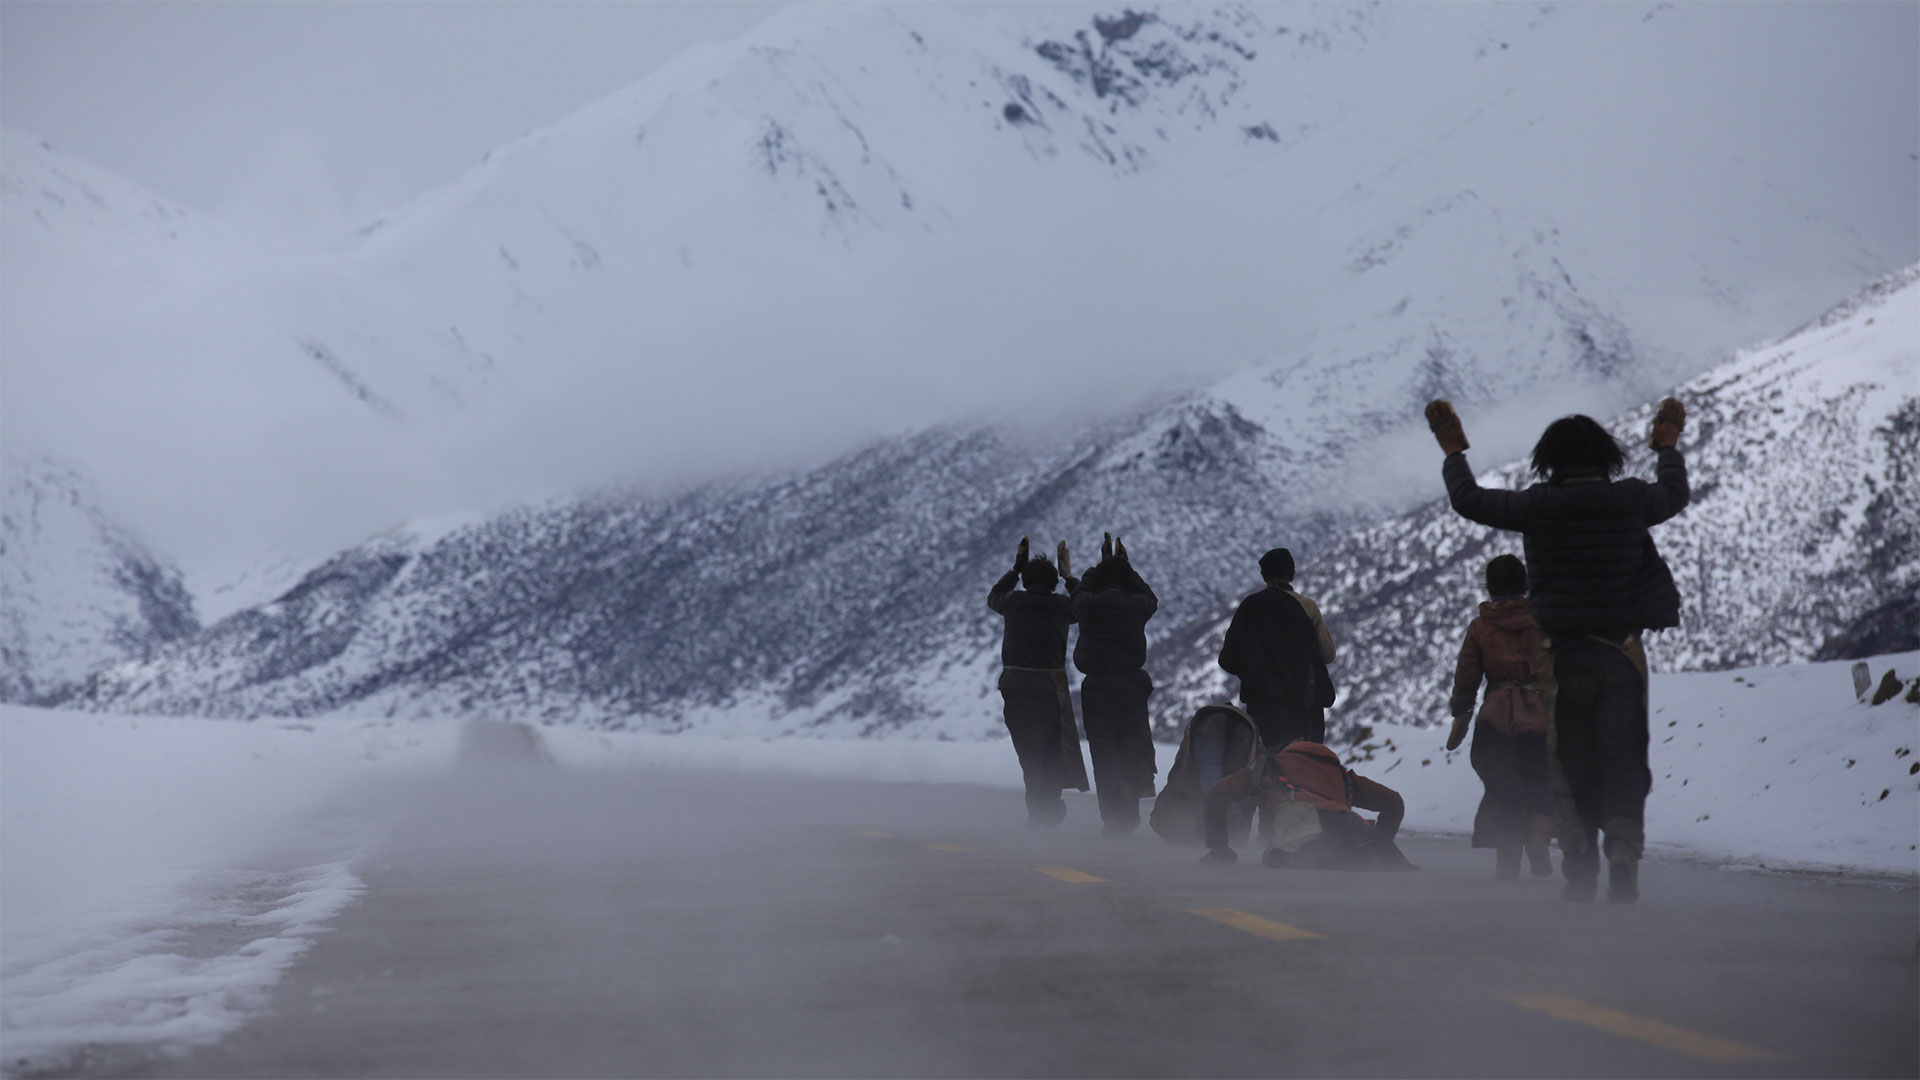 A line of people walk down a snowy mountain roadway in the cold, clapping shoes above their heads